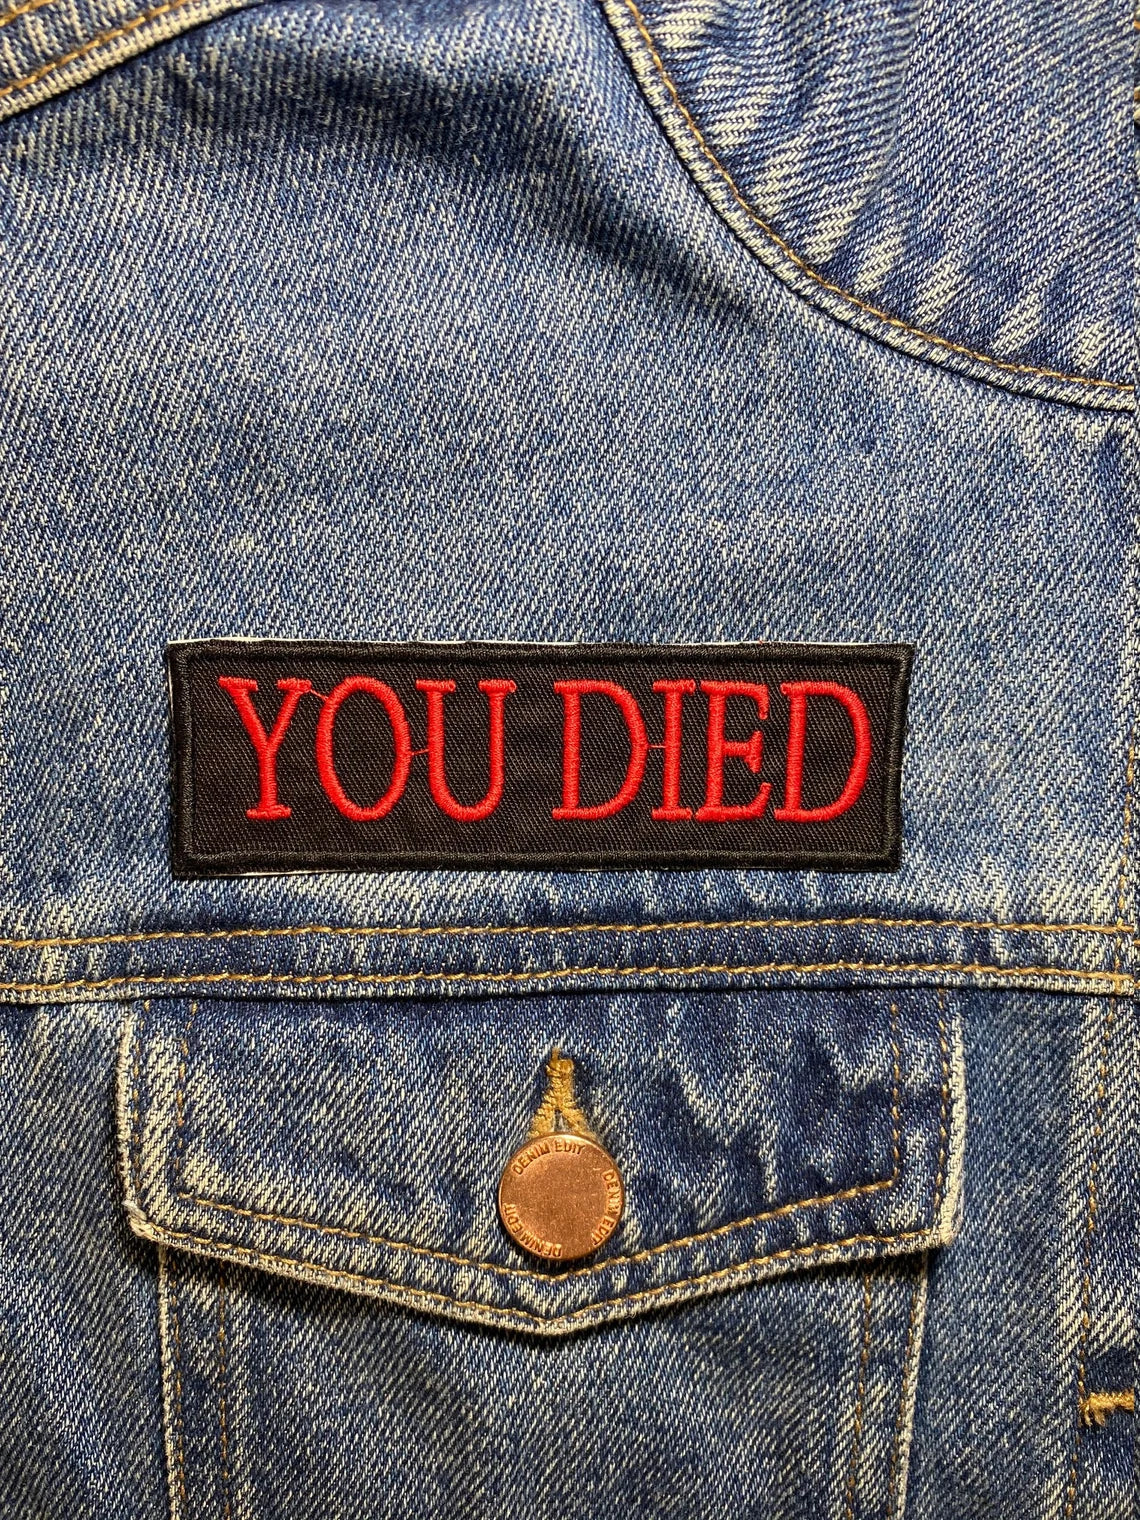 You Died Souls Bourne inspired Patch (3.5 Inch) Iron or Sew-on Badge Costume Cosplay Horror Movie / Video Game Patches